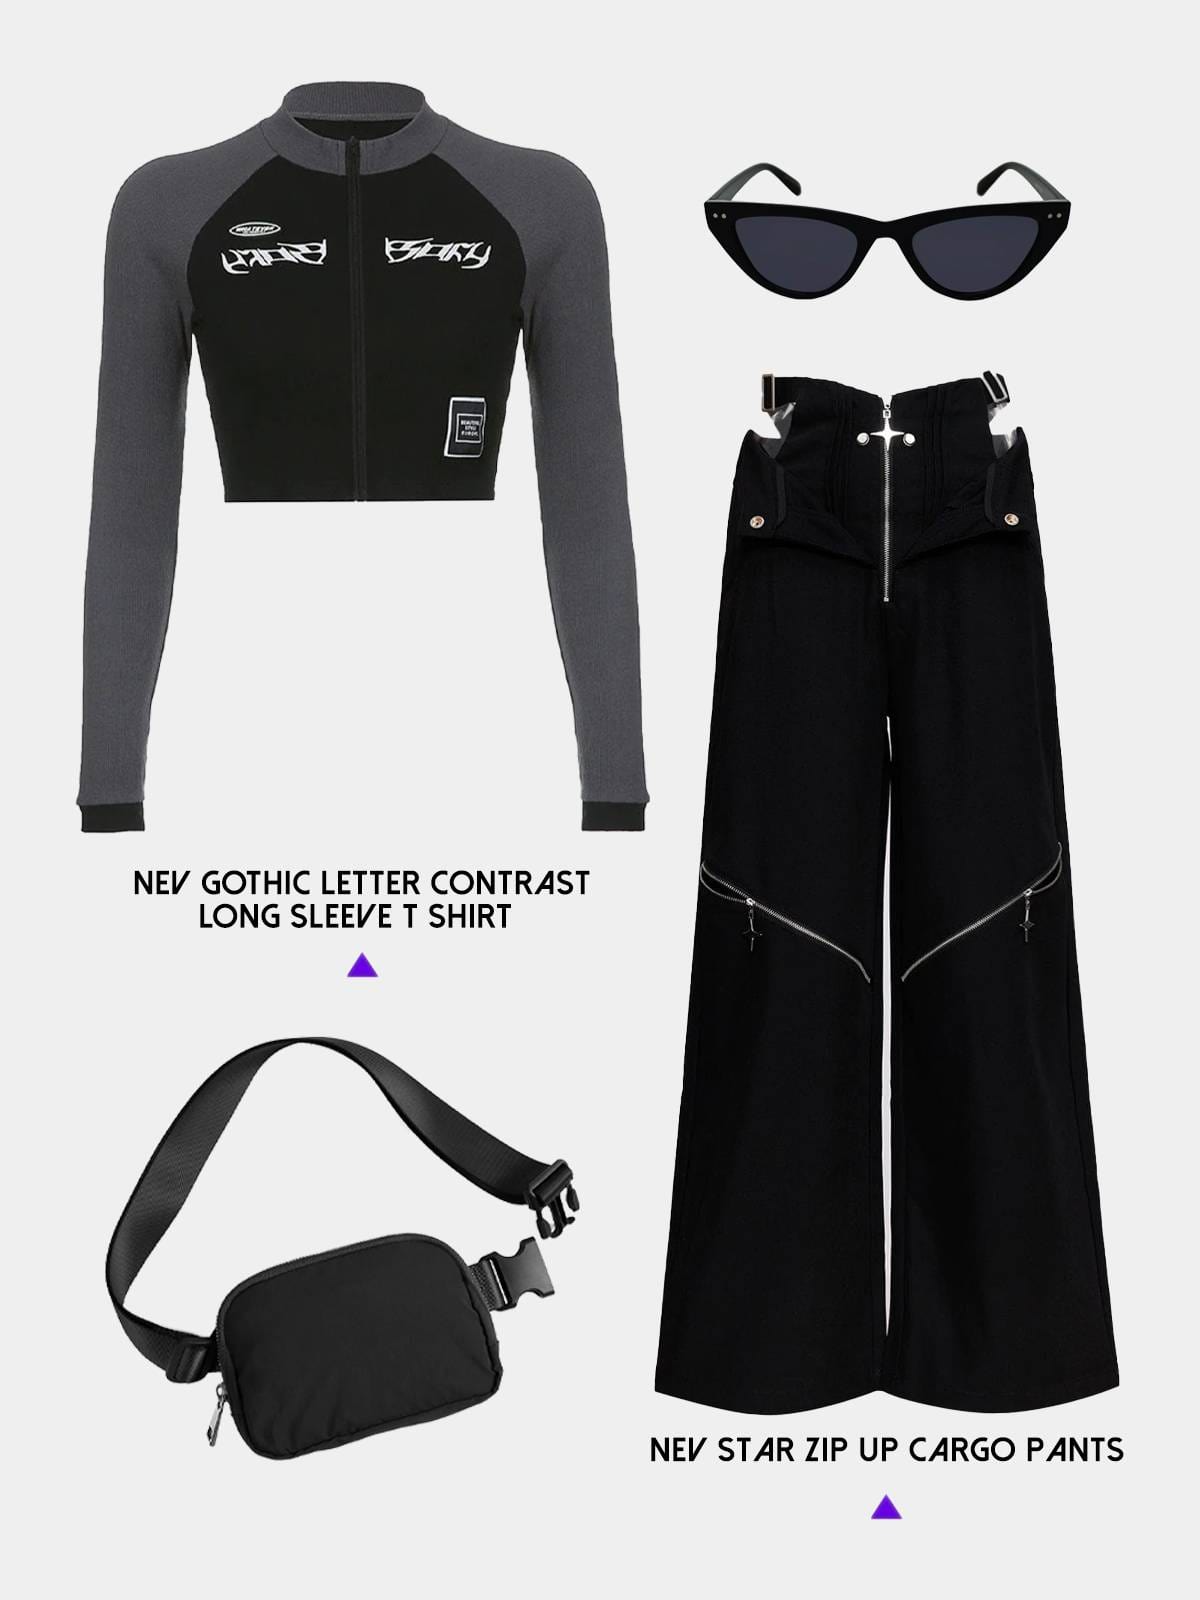 NEV Gothic Letter Contrast Long Sleeve Crop Top